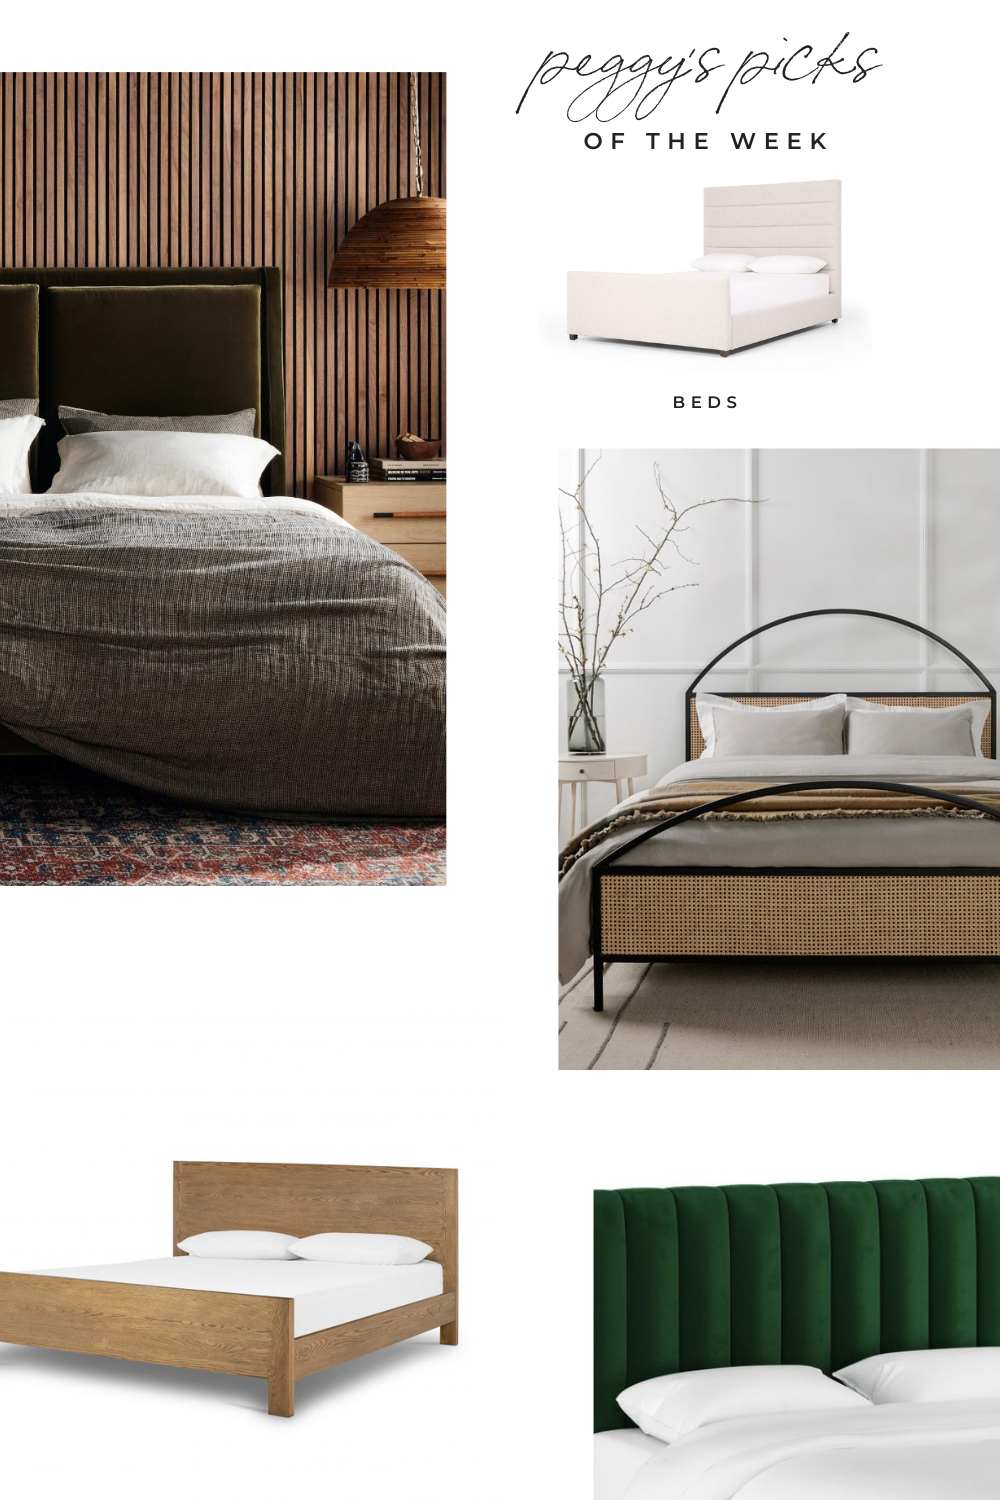 Peggy's Picks of the Week Bed Frames